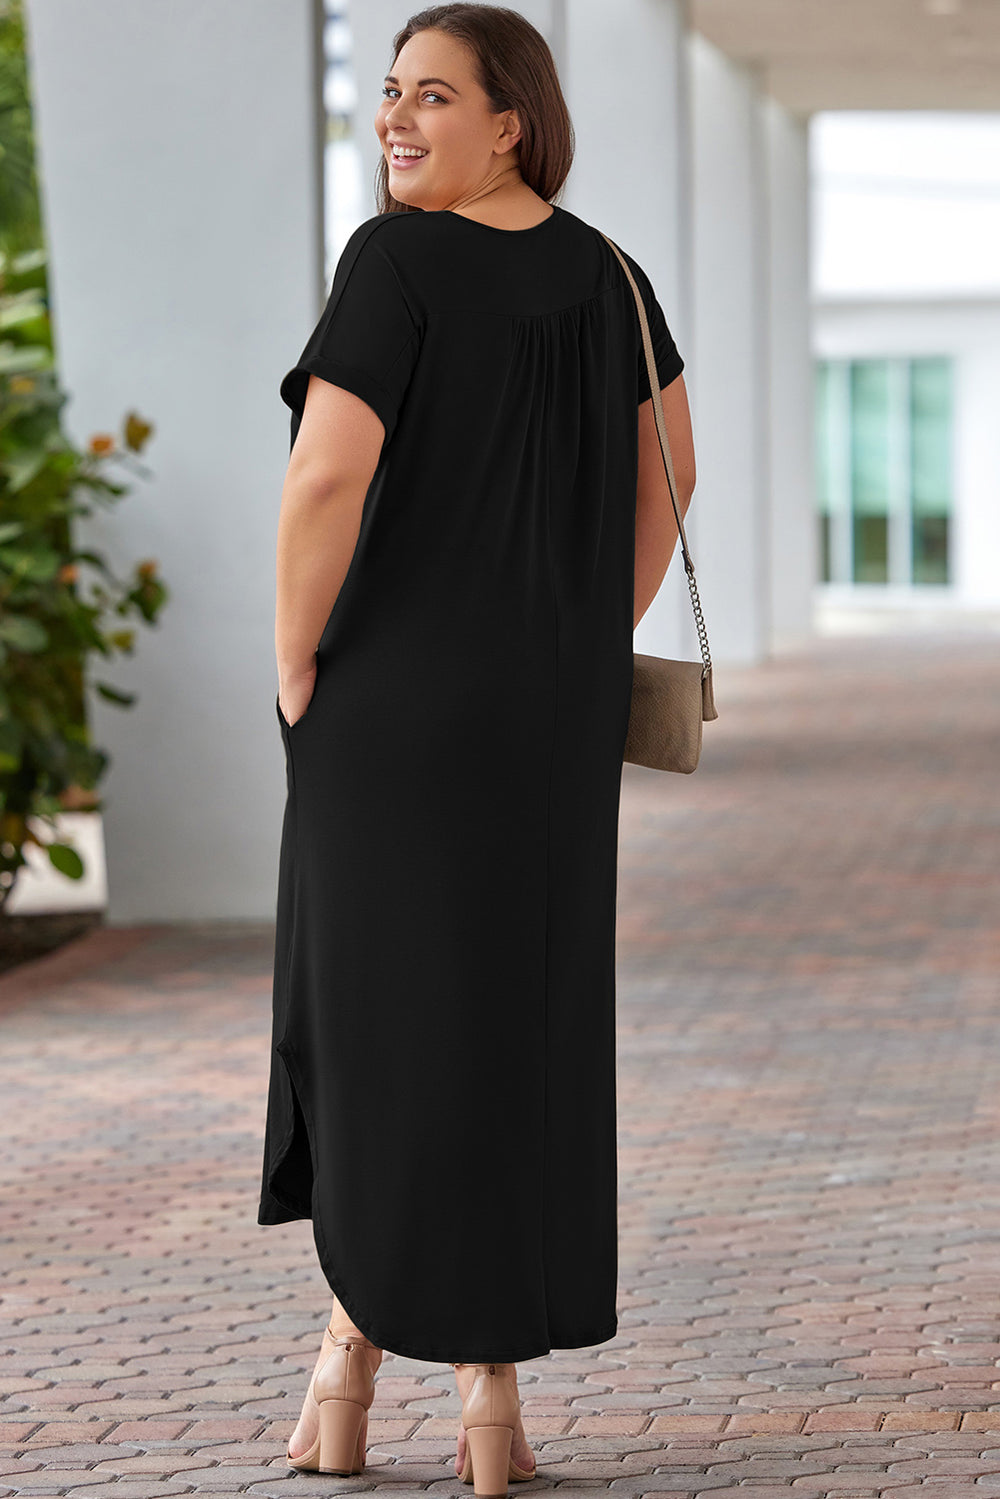 Black Plus Size V Neck Maxi Dress with Rolled Cuffs